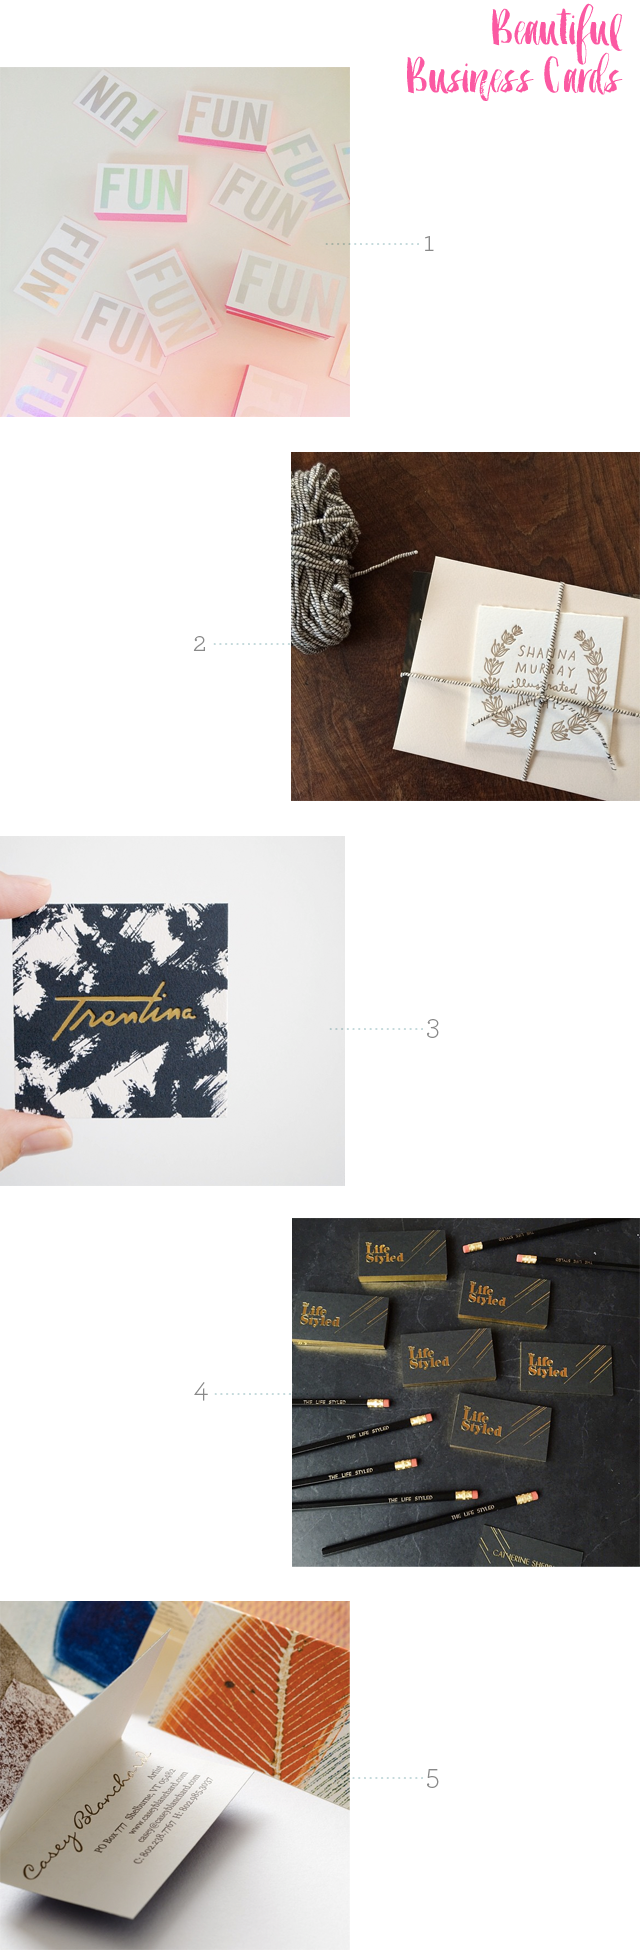 Business Card Inspiration via Oh So Beautiful Paper